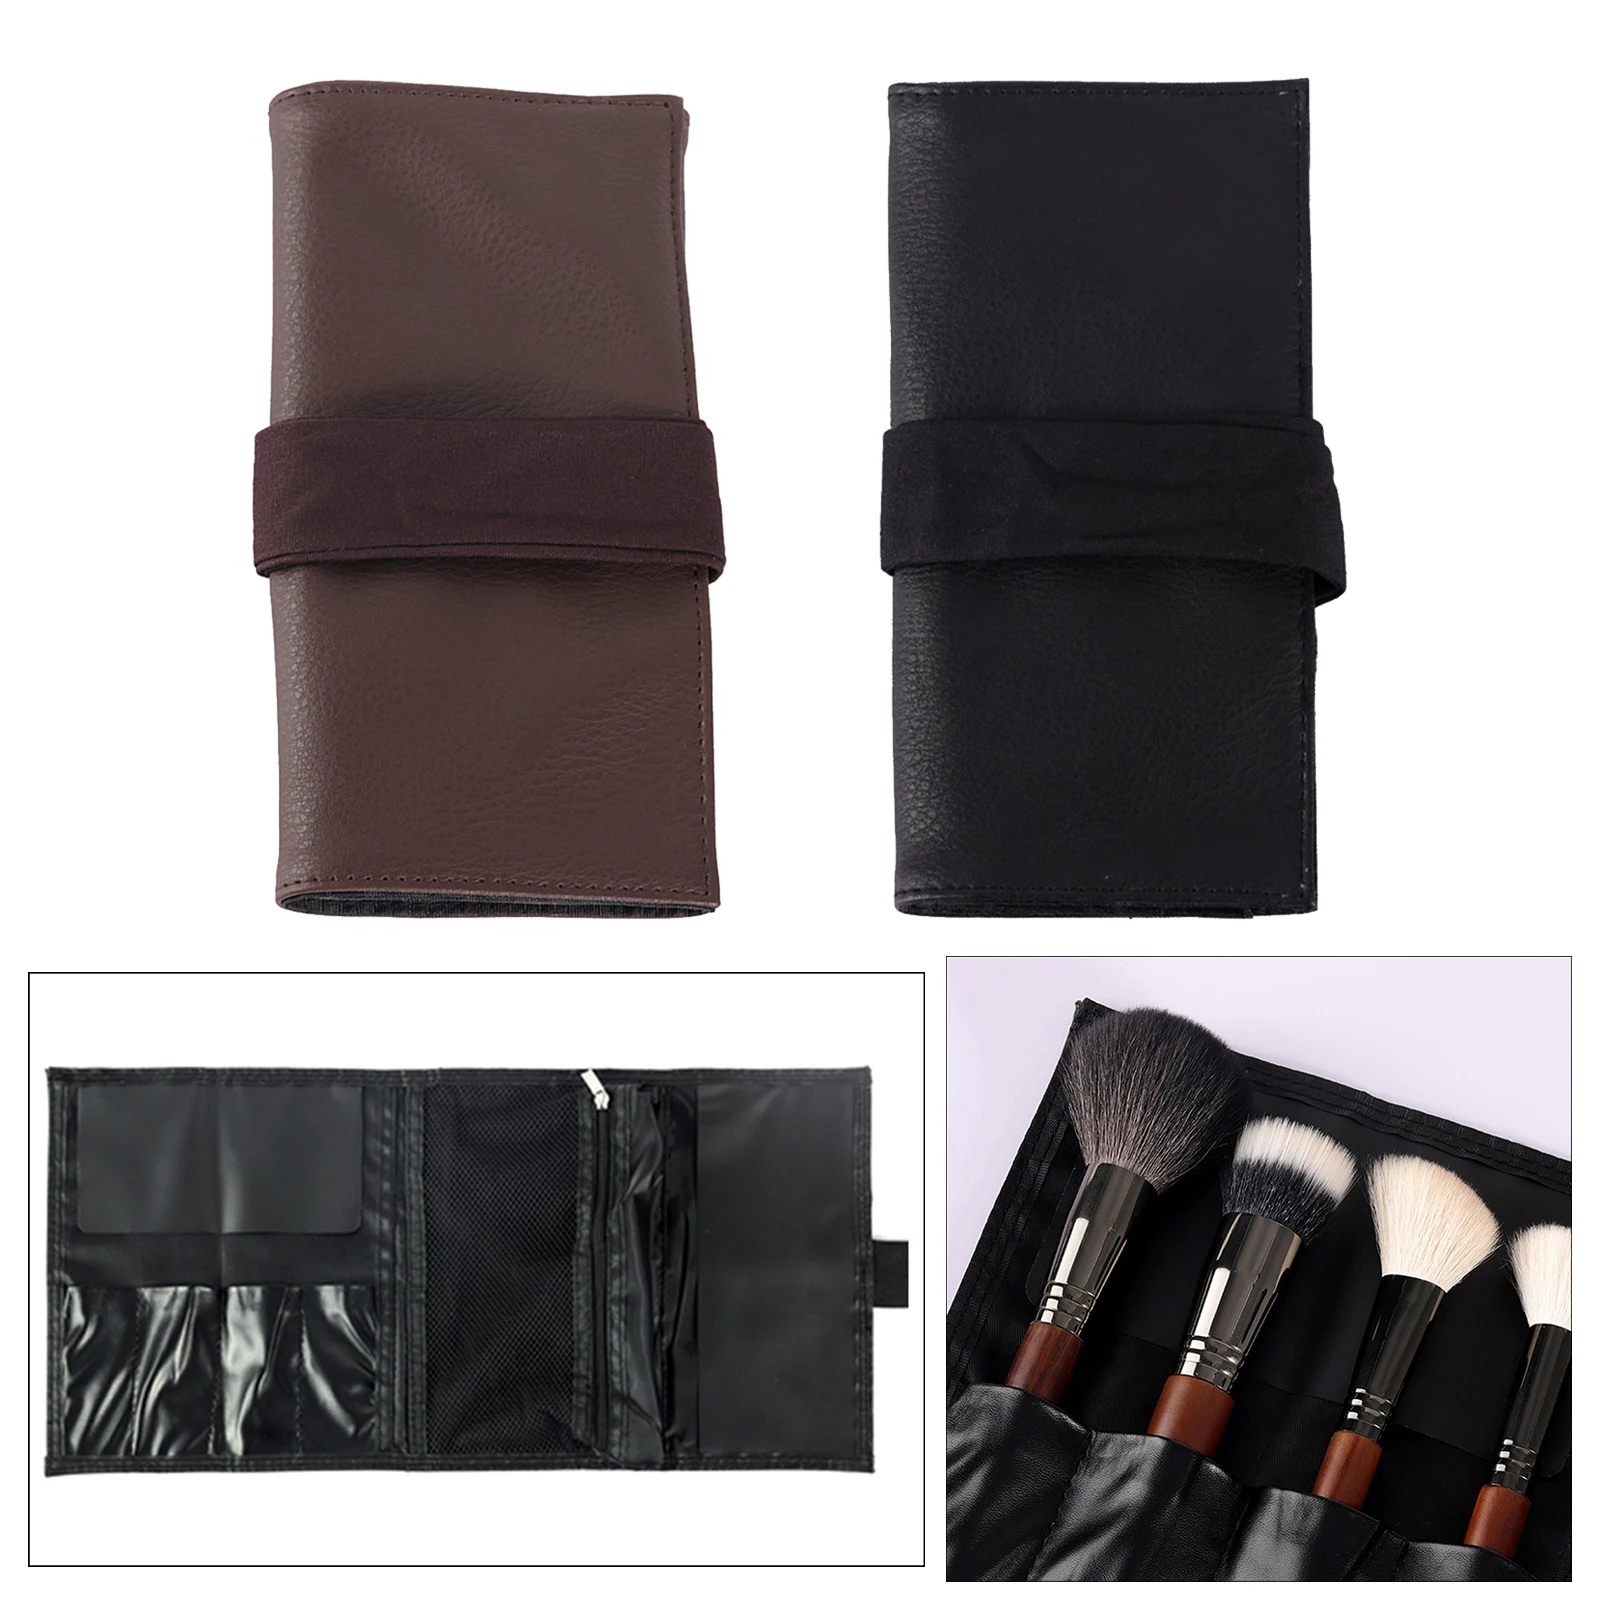 Makeup PU Leather Storage Rolling Case for Dating